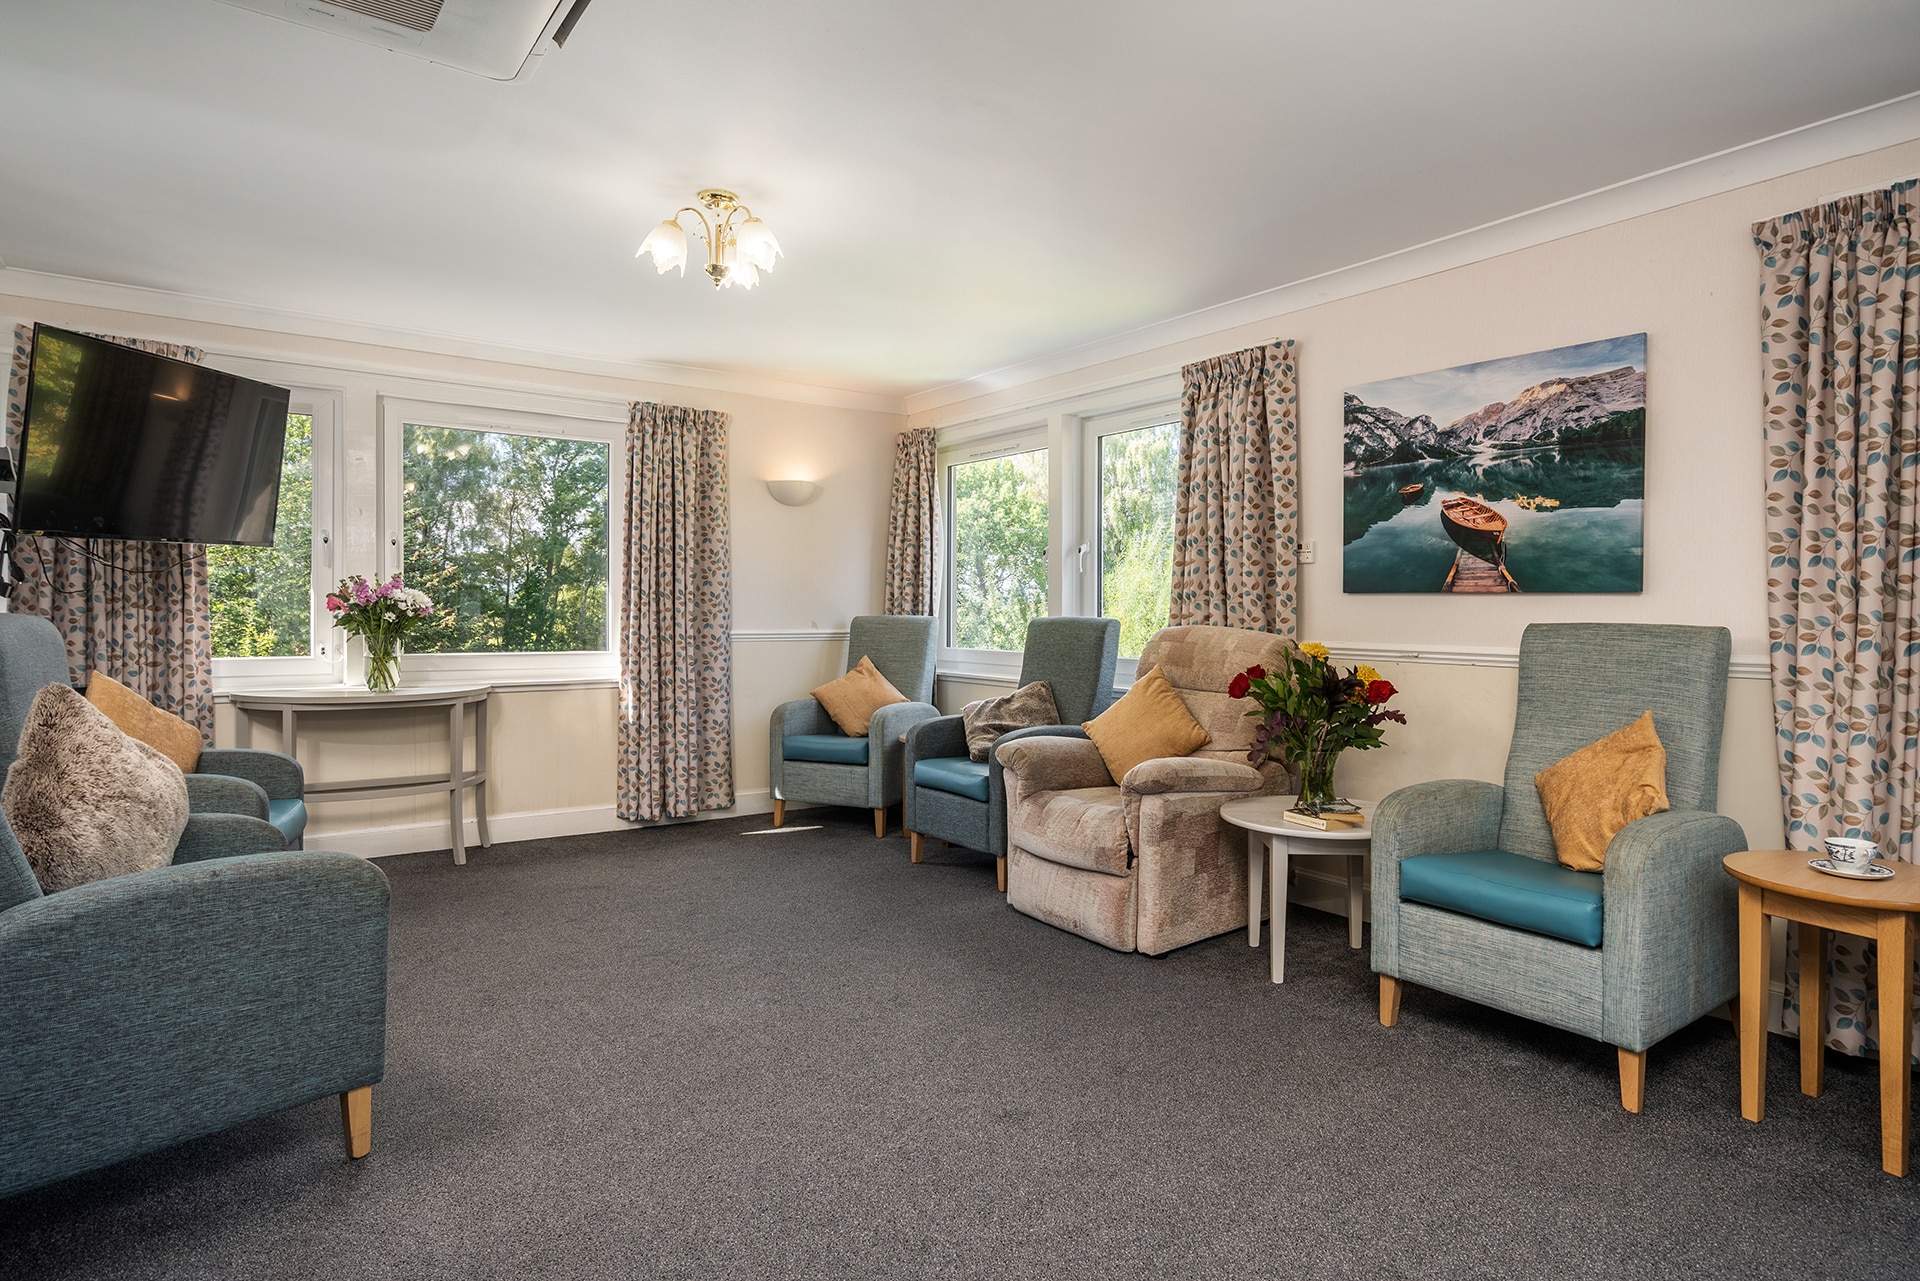 The first floor lounge at Muirton House Care Home with views across the putting green, garden and surrounding countryside.